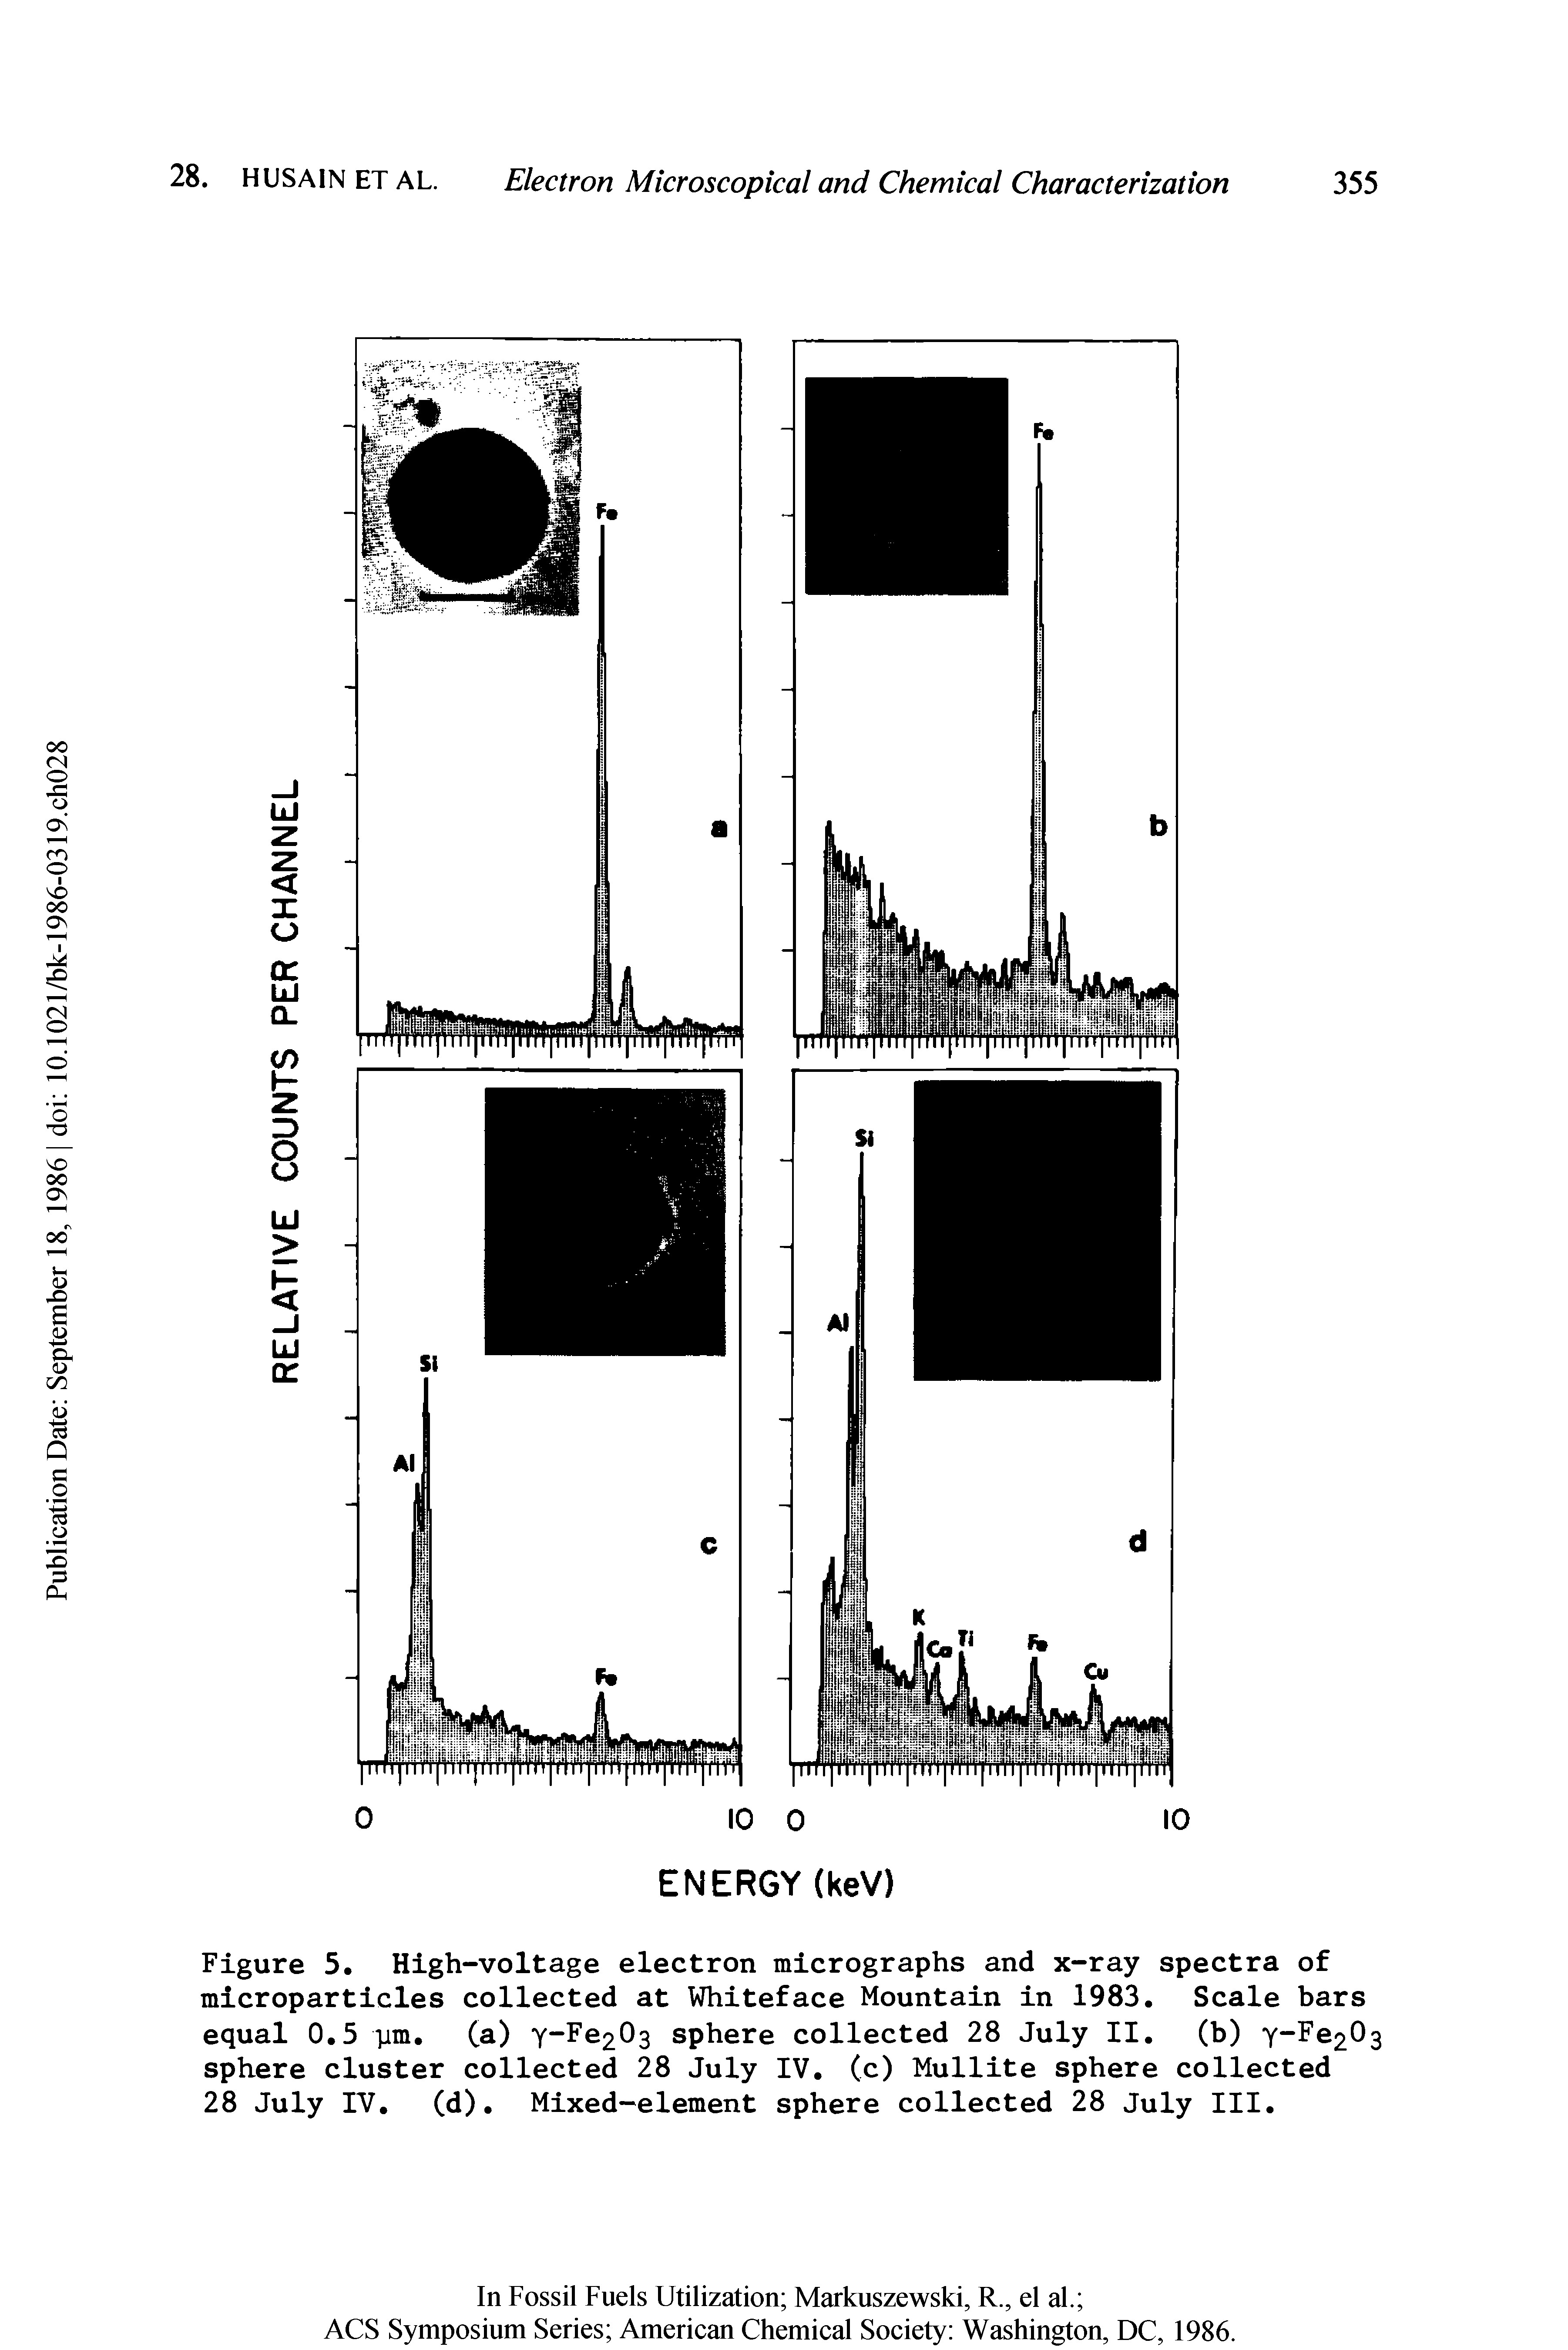 Figure 5. High-voltage electron micrographs and x-ray spectra of microparticles collected at Whiteface Mountain in 1983. Scale bars equal 0.5 pm. (a) y-Fe203 sphere collected 28 July II. (b) y-Fe203 sphere cluster collected 28 July IV. (c) Mullite sphere collected 28 July IV. (d). Mixed-element sphere collected 28 July III.